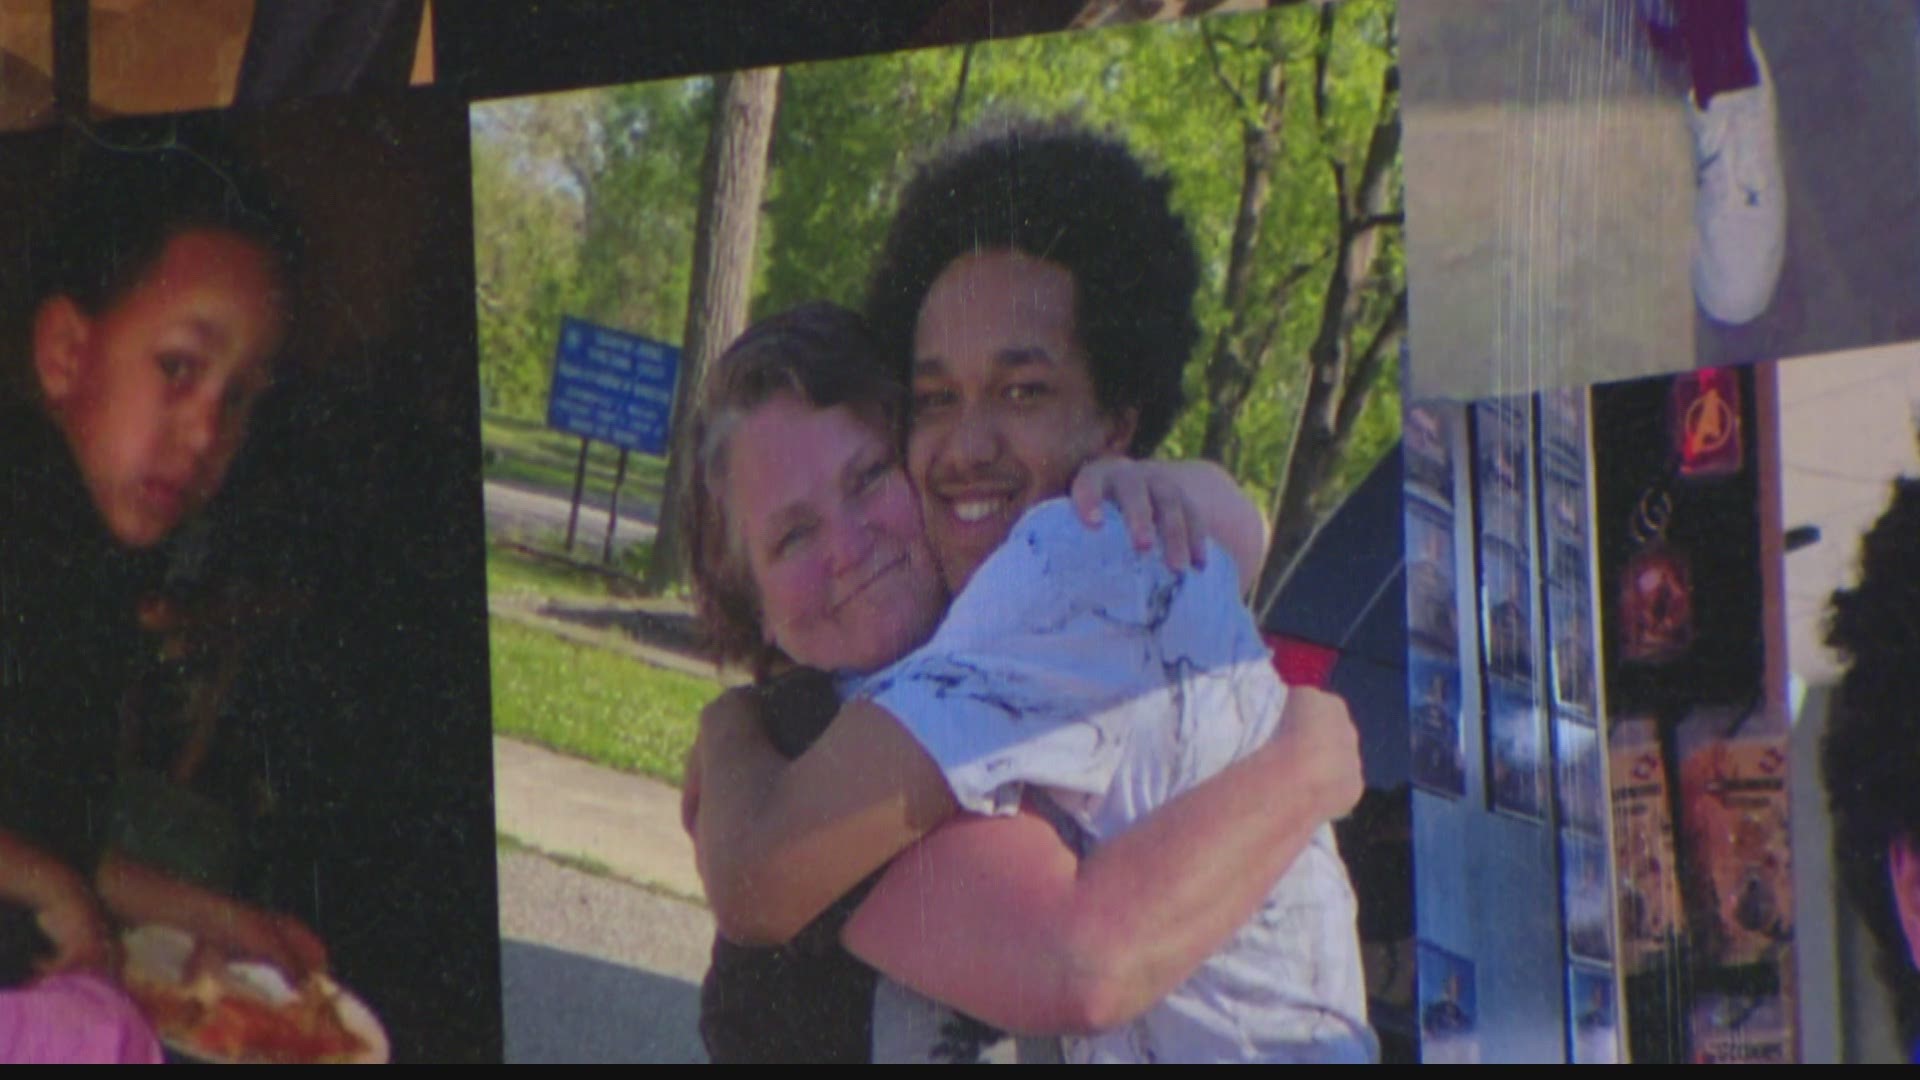 A Brownsburg mother who lost her son to gun violence wants answers from police about why they aren't doing more to stop it.